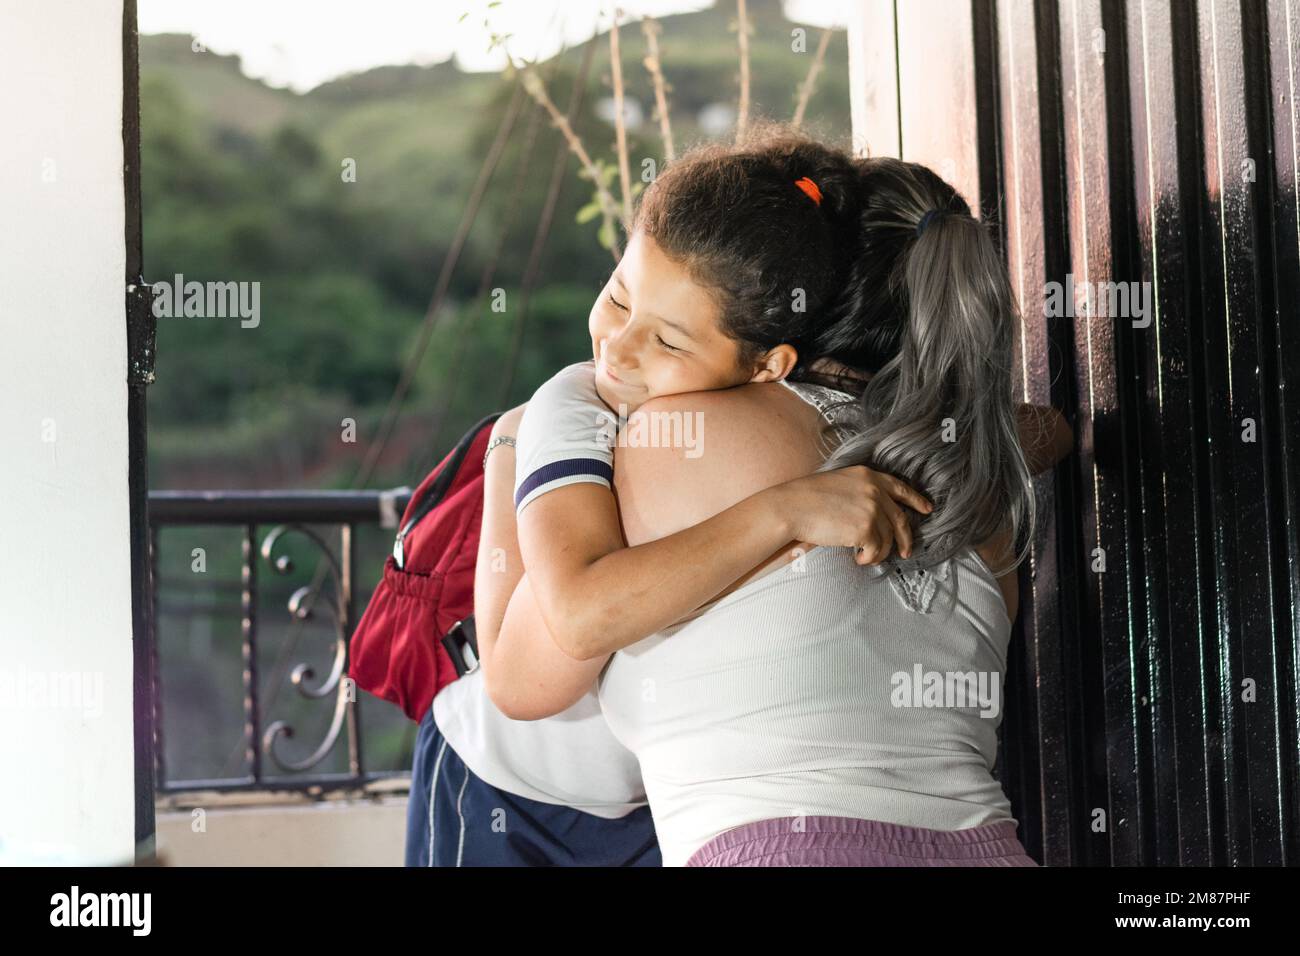 young mother saying goodbye to her little daughter before leaving for school. woman giving little girl a hug. Stock Photo